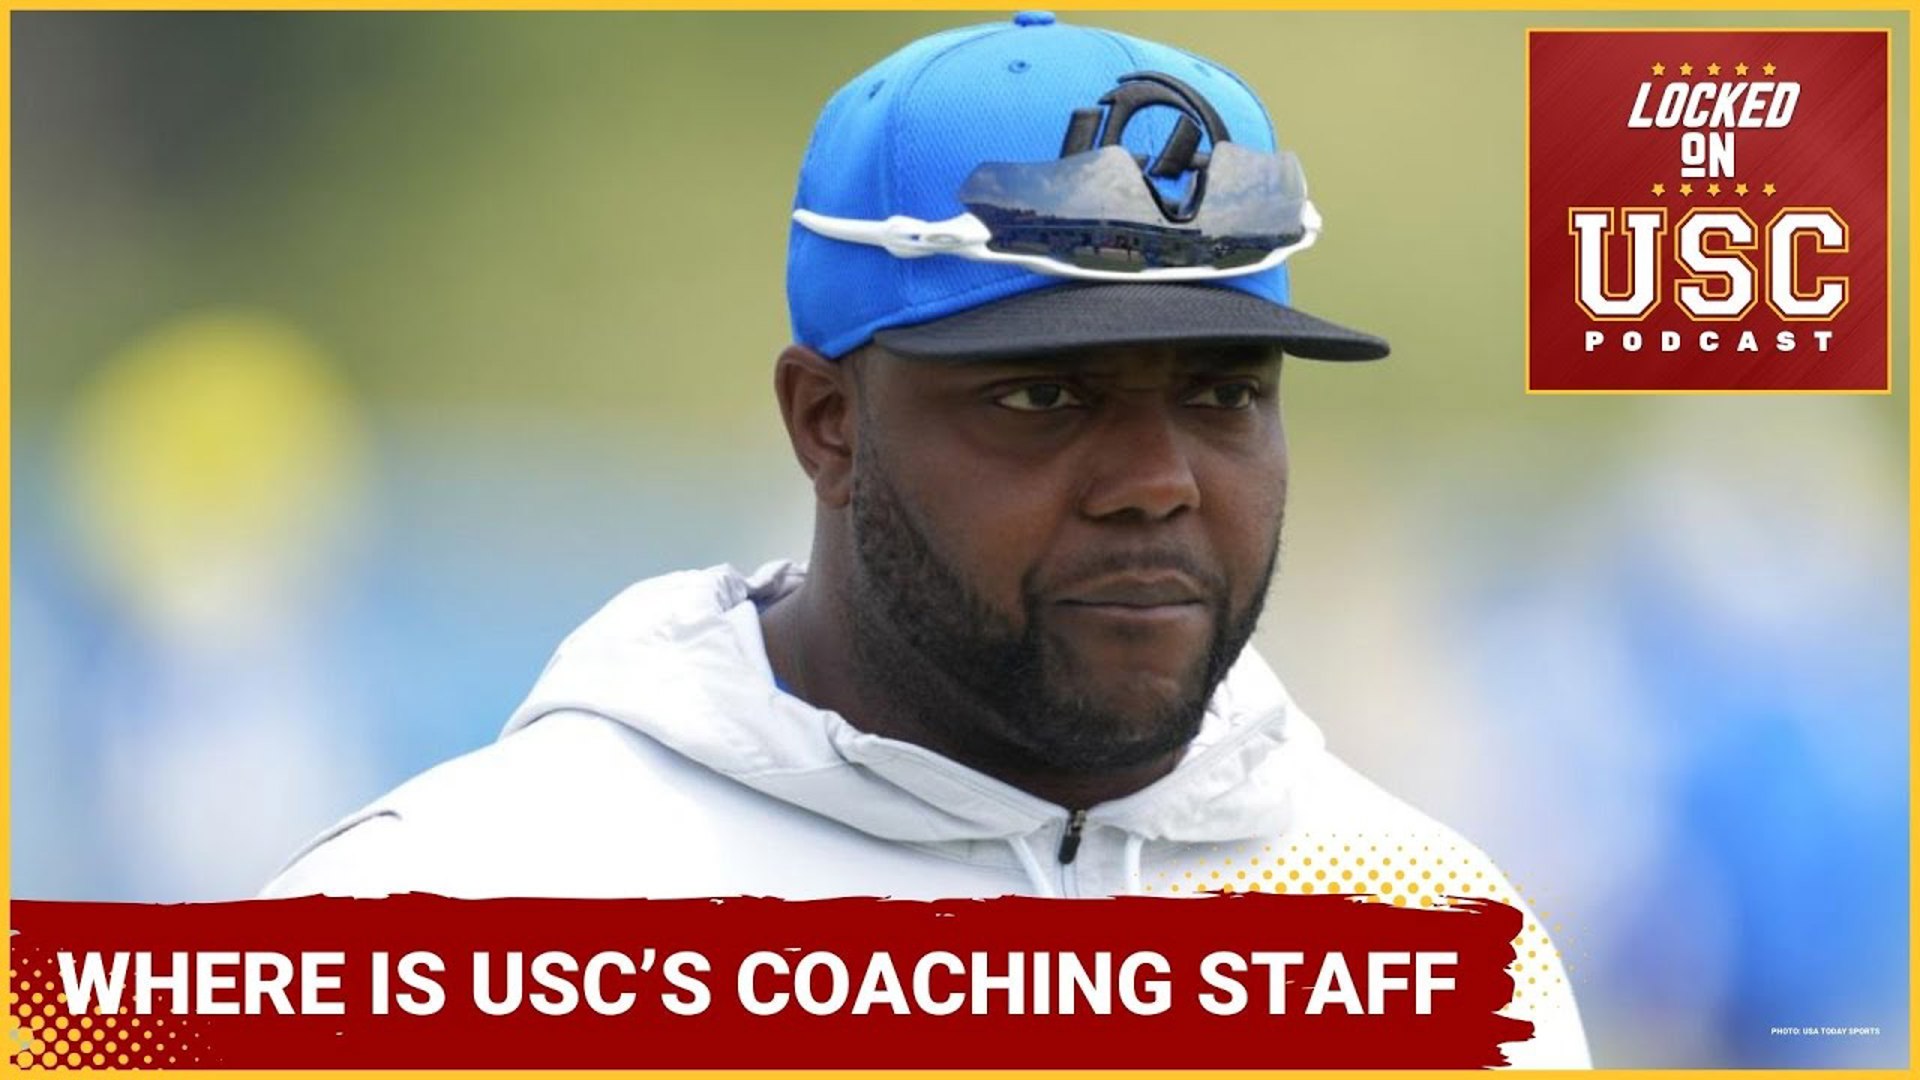 It's the recruiting season and USC's assistant coaches are traveling and visiting high schools all over the country.